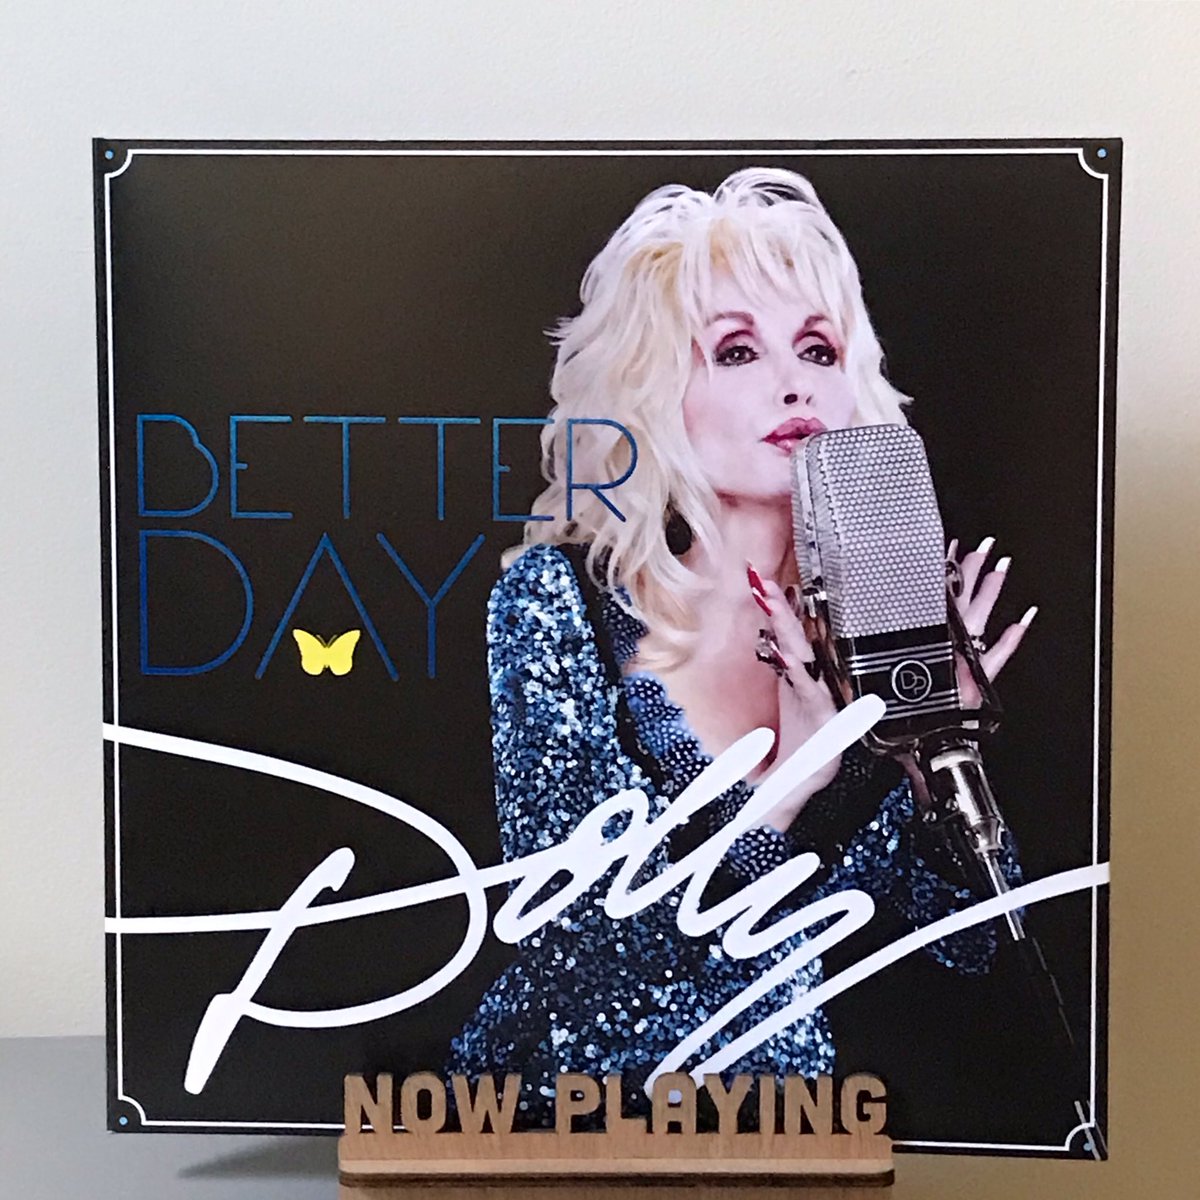 A bit of Dolly.

Now Playing: Dolly Parton “Better Day” (2011; 2024 #VMP release).

#vinyl #vinylrecords #vinylcollection #vinylcollector #vinylcommunity #vinyladdict #vinylcollectionpost #vinilo #vinilos #dollyparton #dolly #country #vinylmeplease #nowplaying